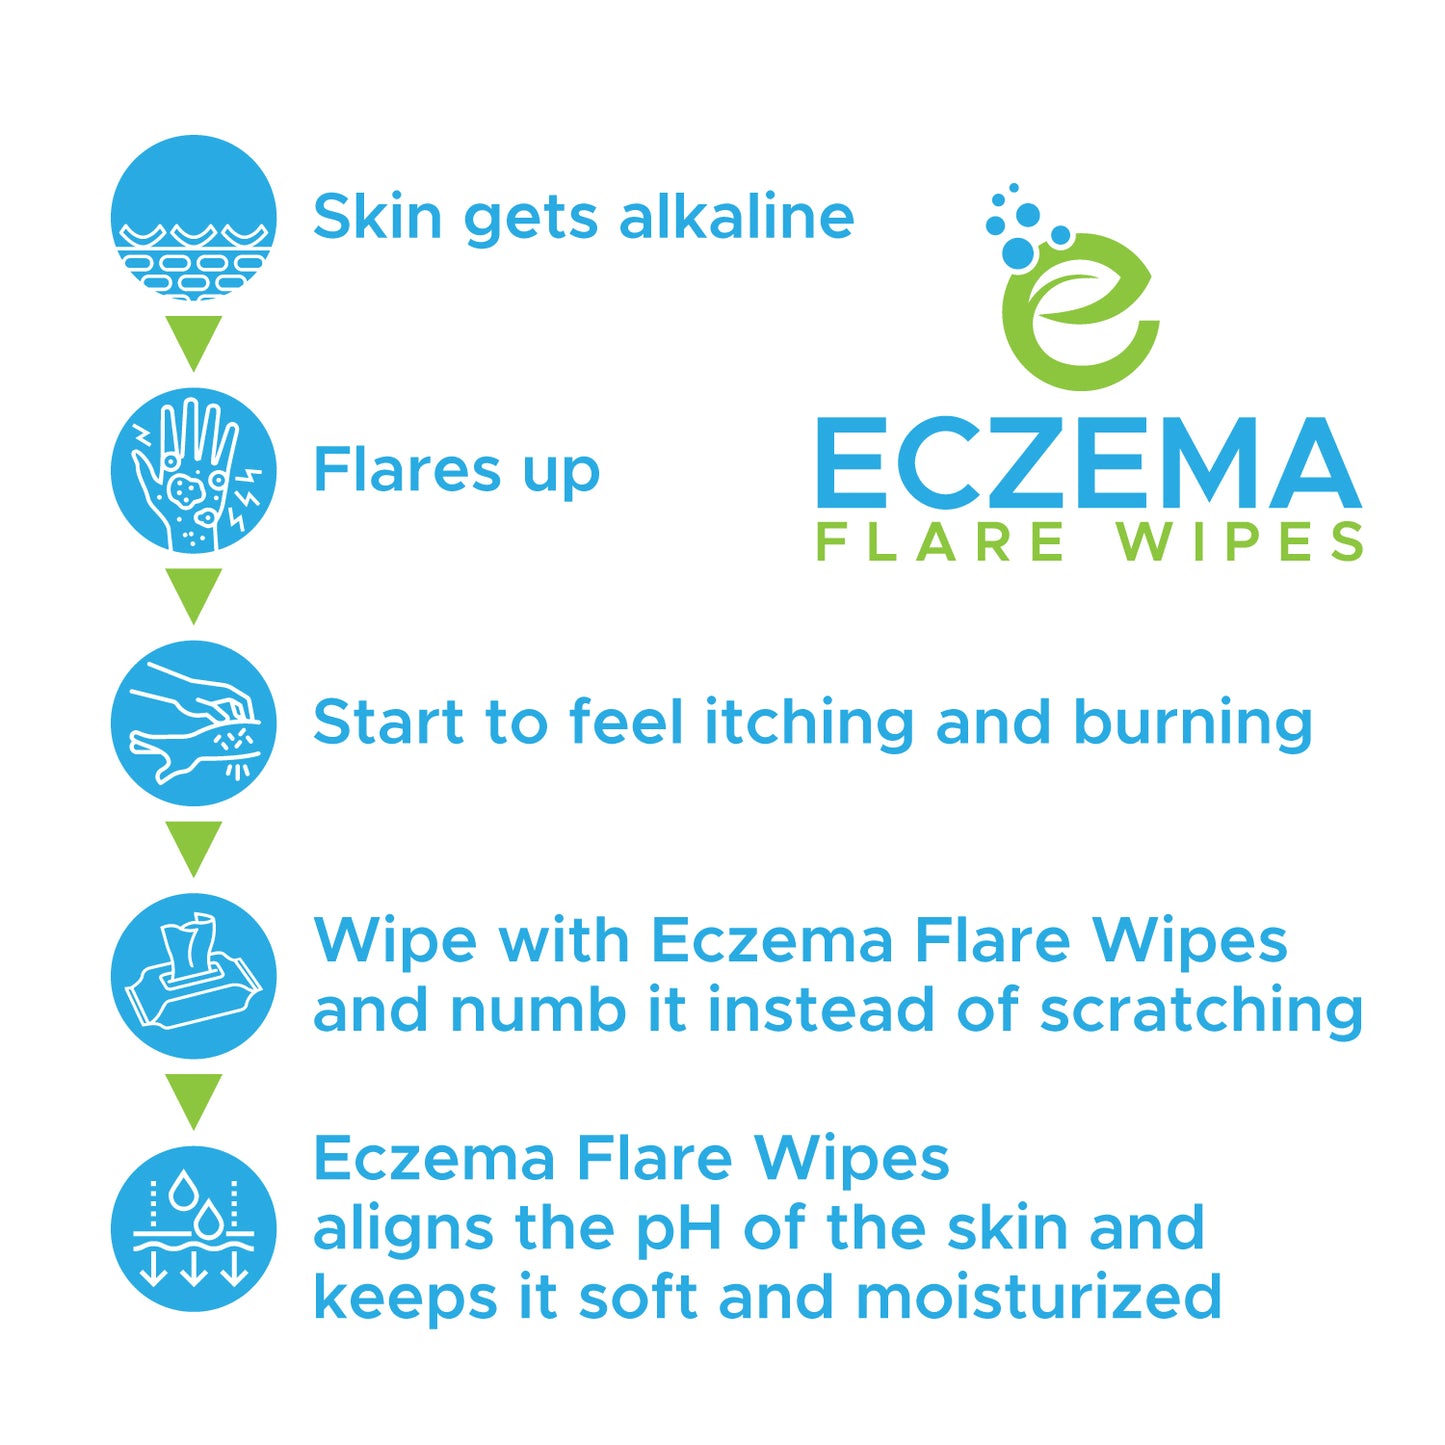 Skin gets alkaline > Flares up > Start to feel itching and burning > Wipe with Eczema Flare Wipes and numb it instead of scratching > Eczema Flare Wipes aligns the pH of the skin and keeps it soft and moisturized